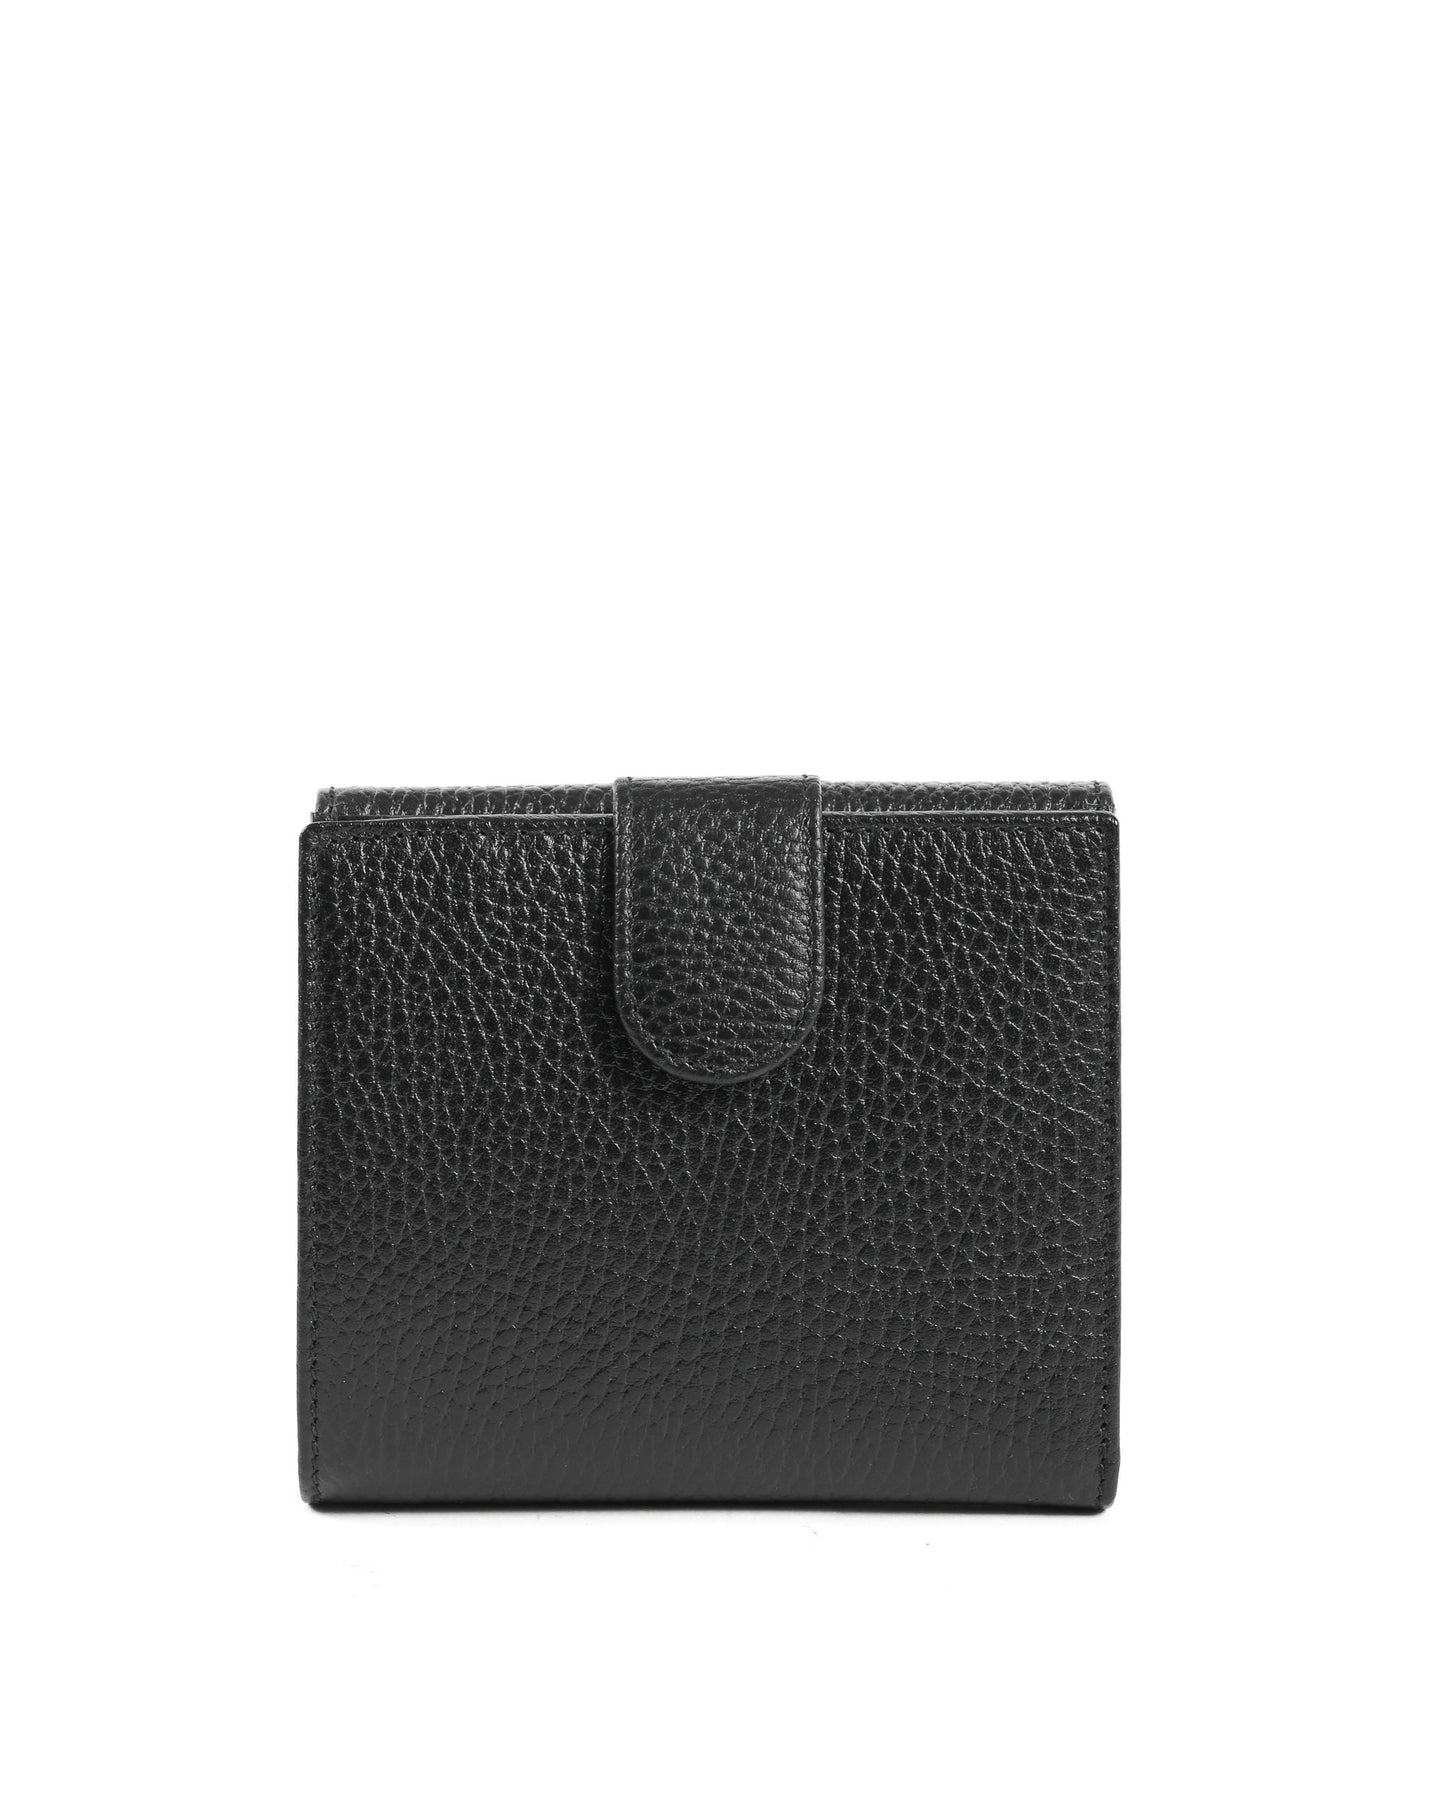 Gucci Leather Interlocking small wallet 615525 CAO0G 1000